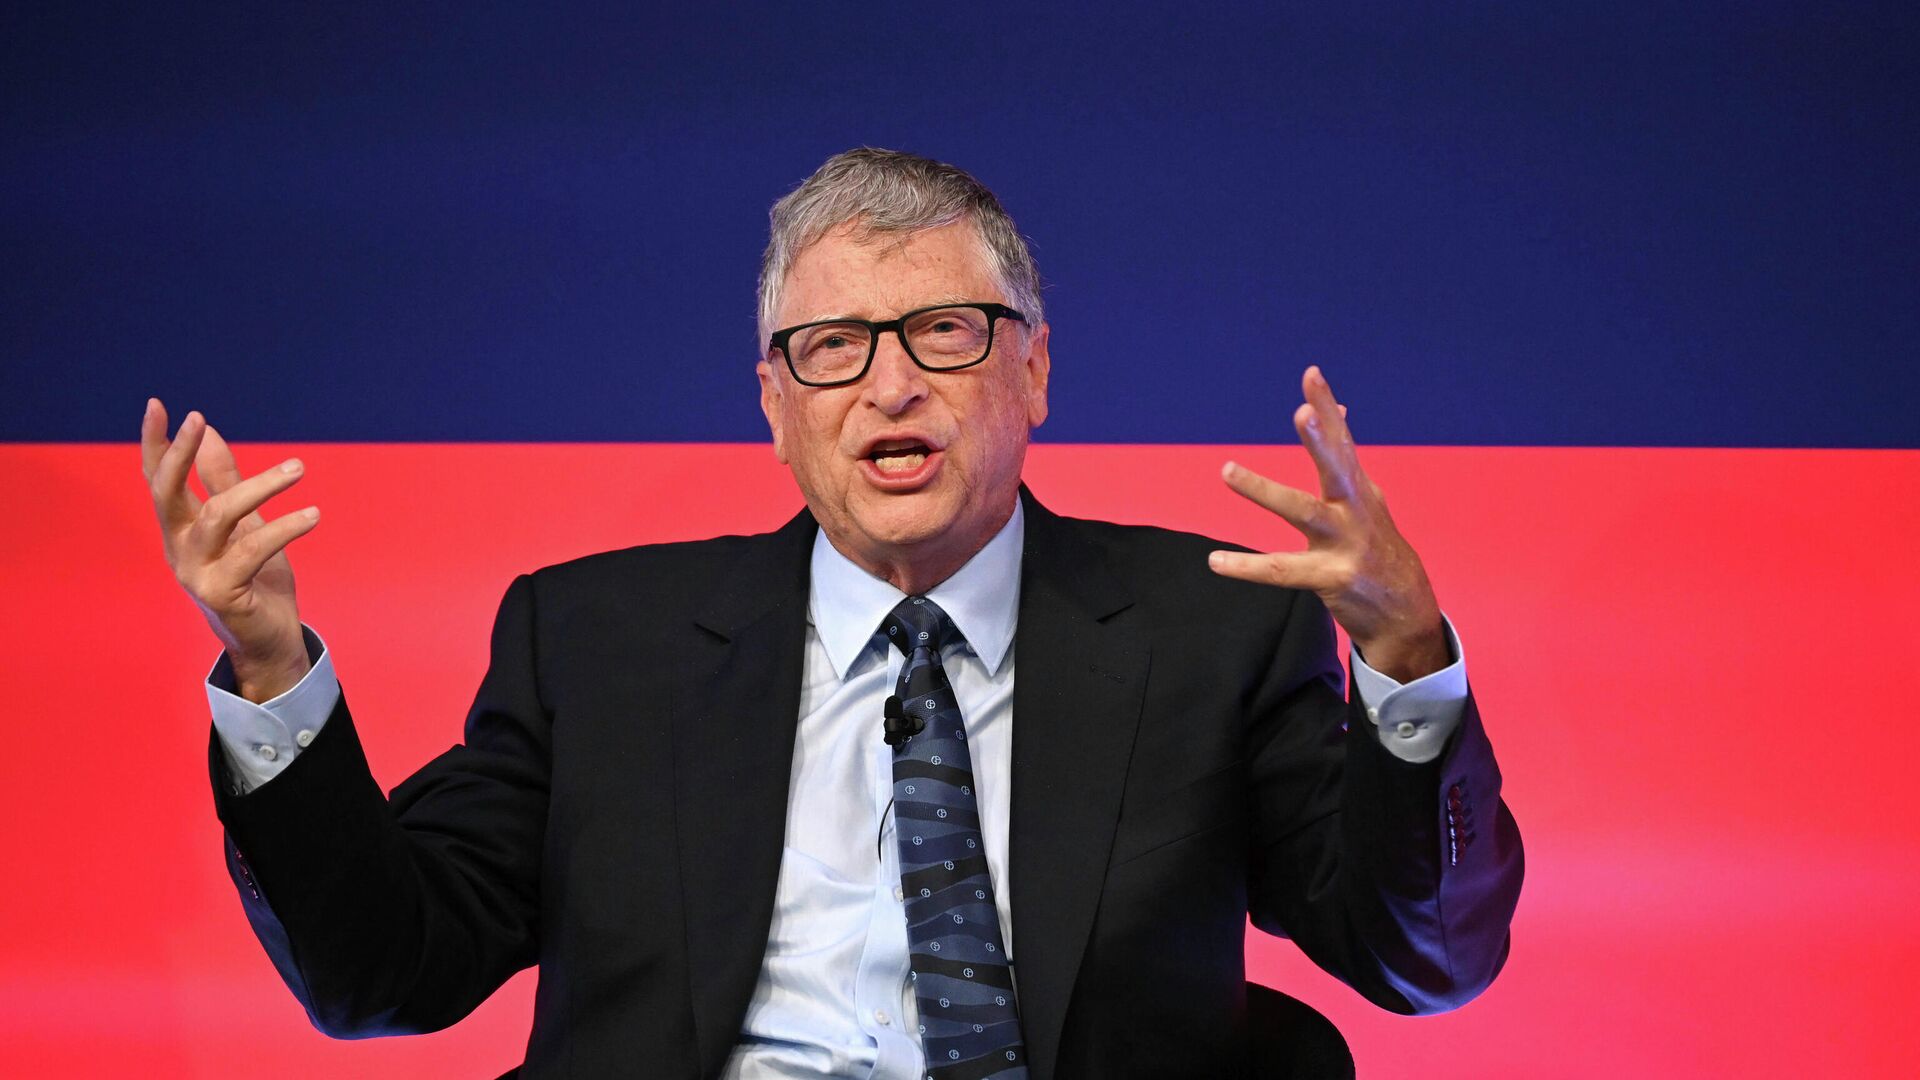 Bill Gates speaks during the Global Investment Summit at the Science Museum, London, Tuesday, Oct, 19, 2021 - Sputnik International, 1920, 14.01.2022